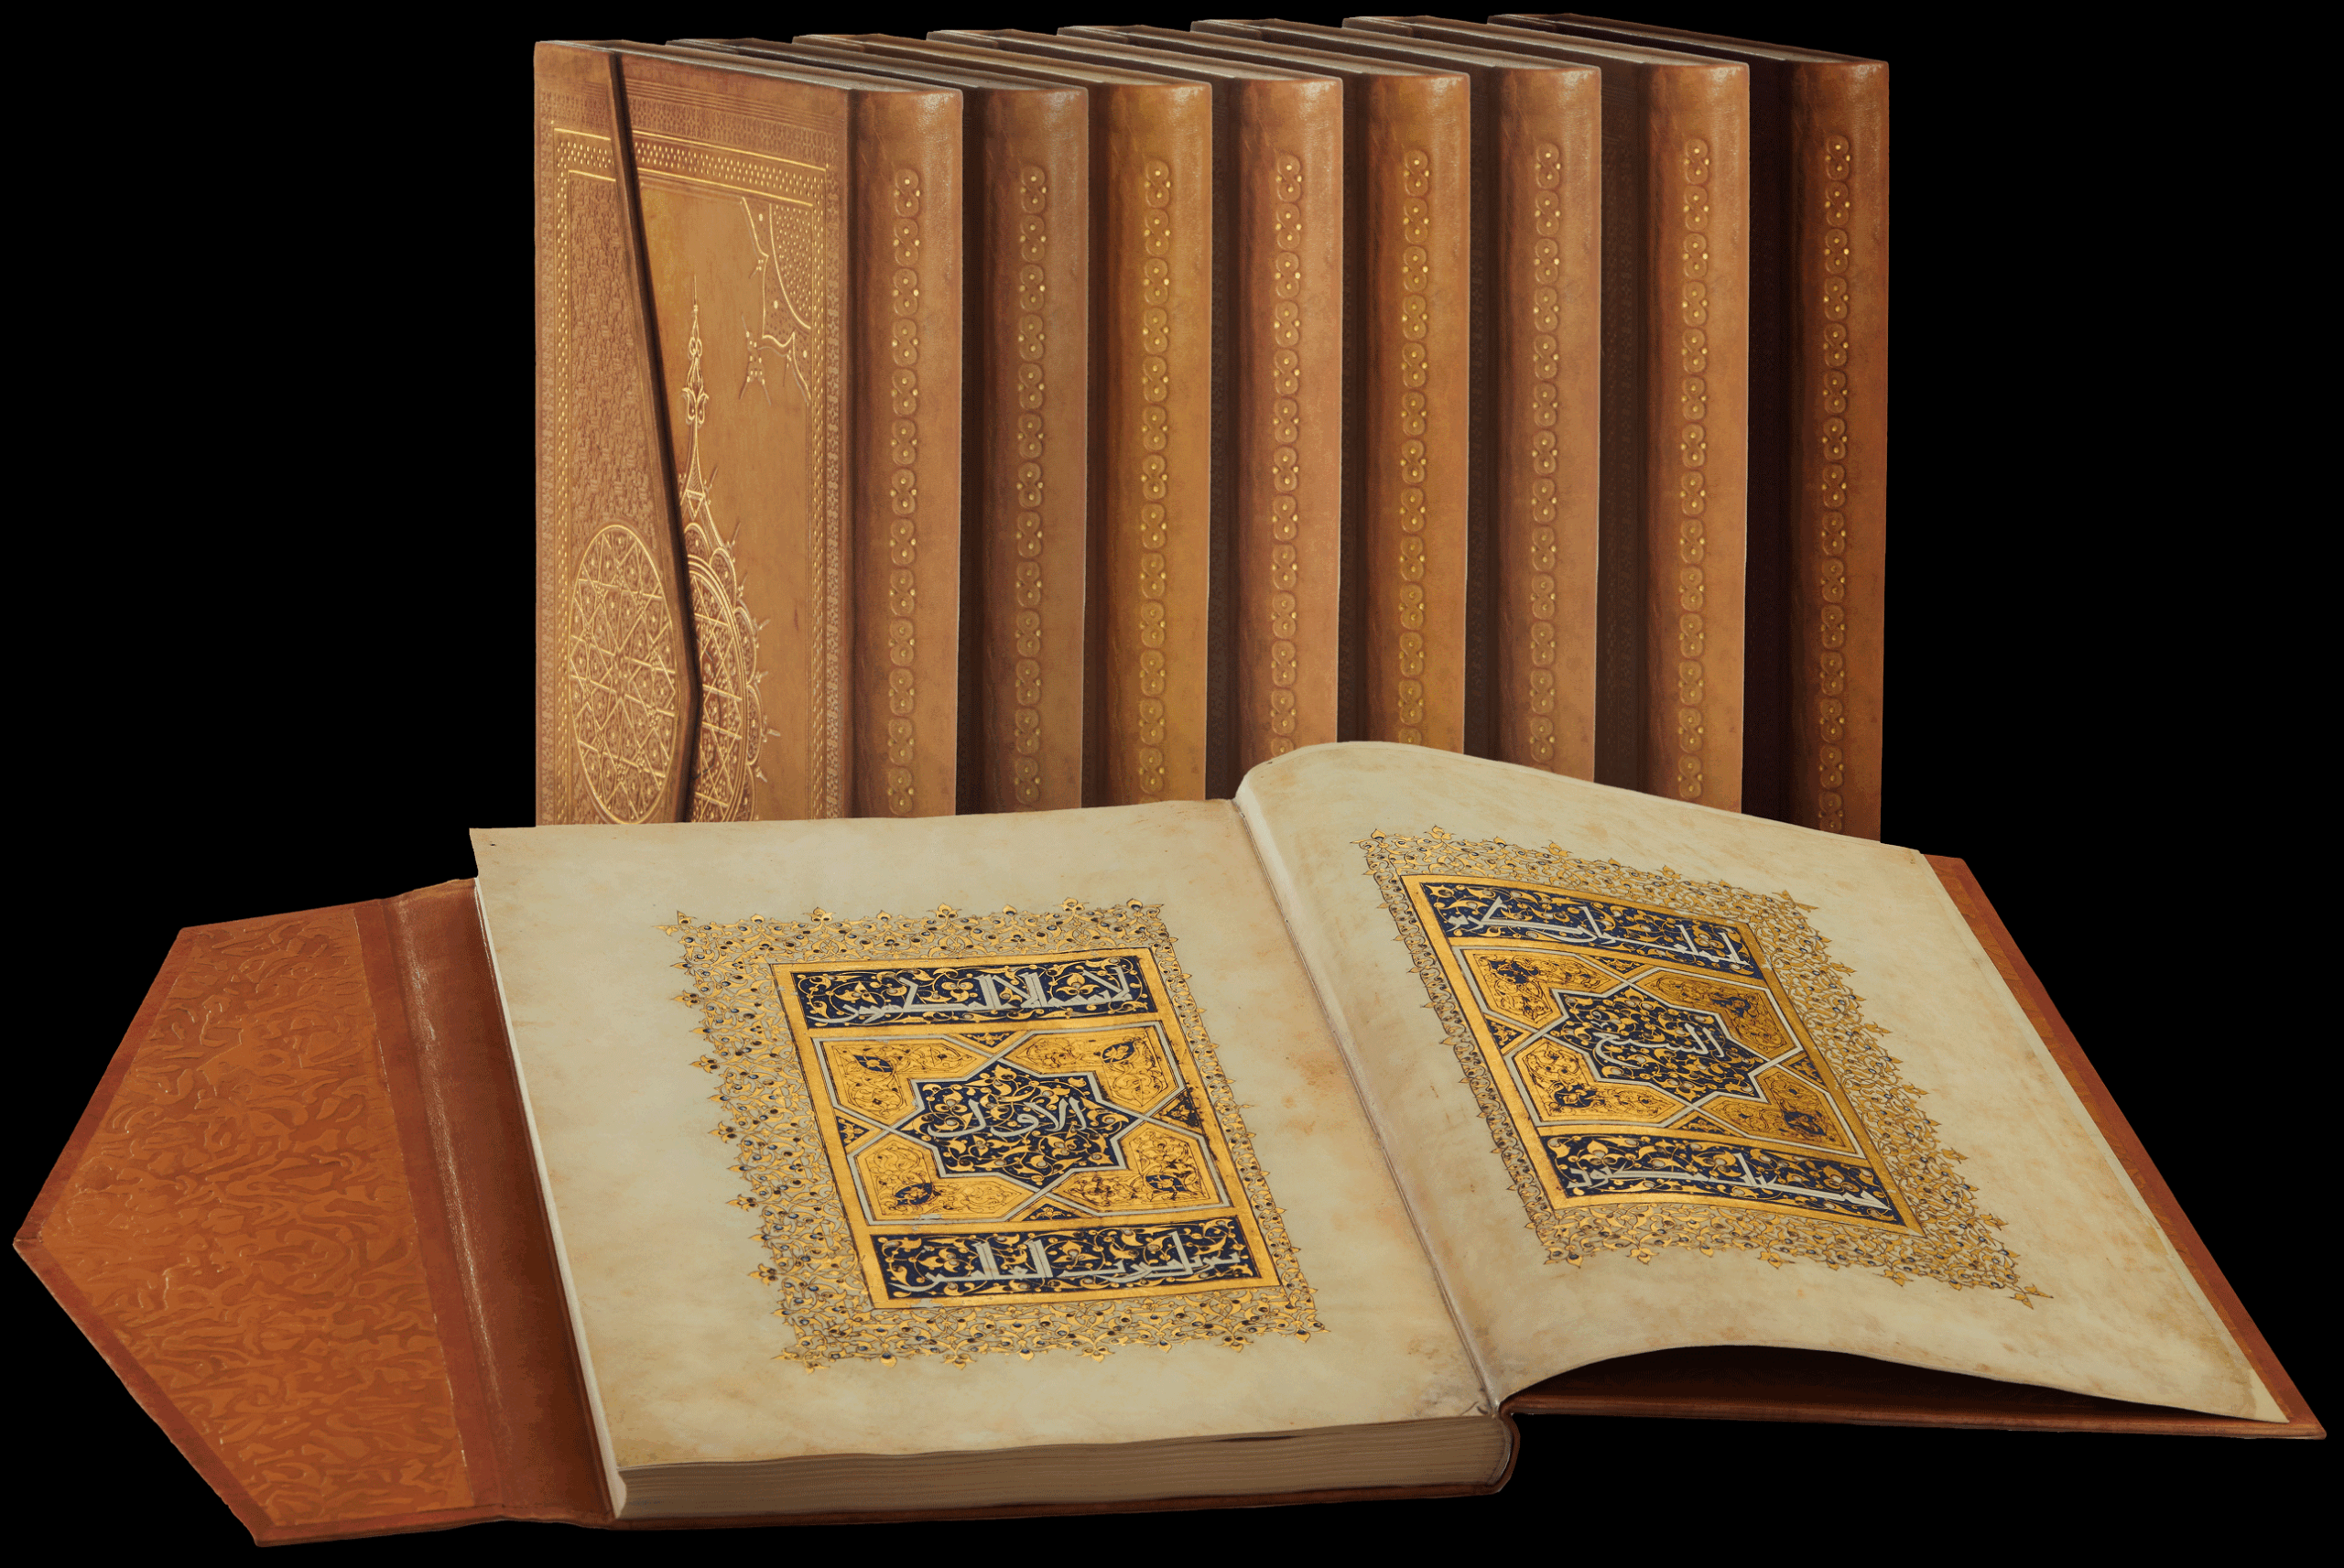 The seven volumes of the Baybars Qur’an facsimile edition. The eighth volume is the extensive Commentary Volume. The open volume displays the frontispiece to volume one. <small><a href="https://www.facsimile-editions.com/copyright/">Image © Copyright 2022 Facsimile Editions Ltd</a></small>